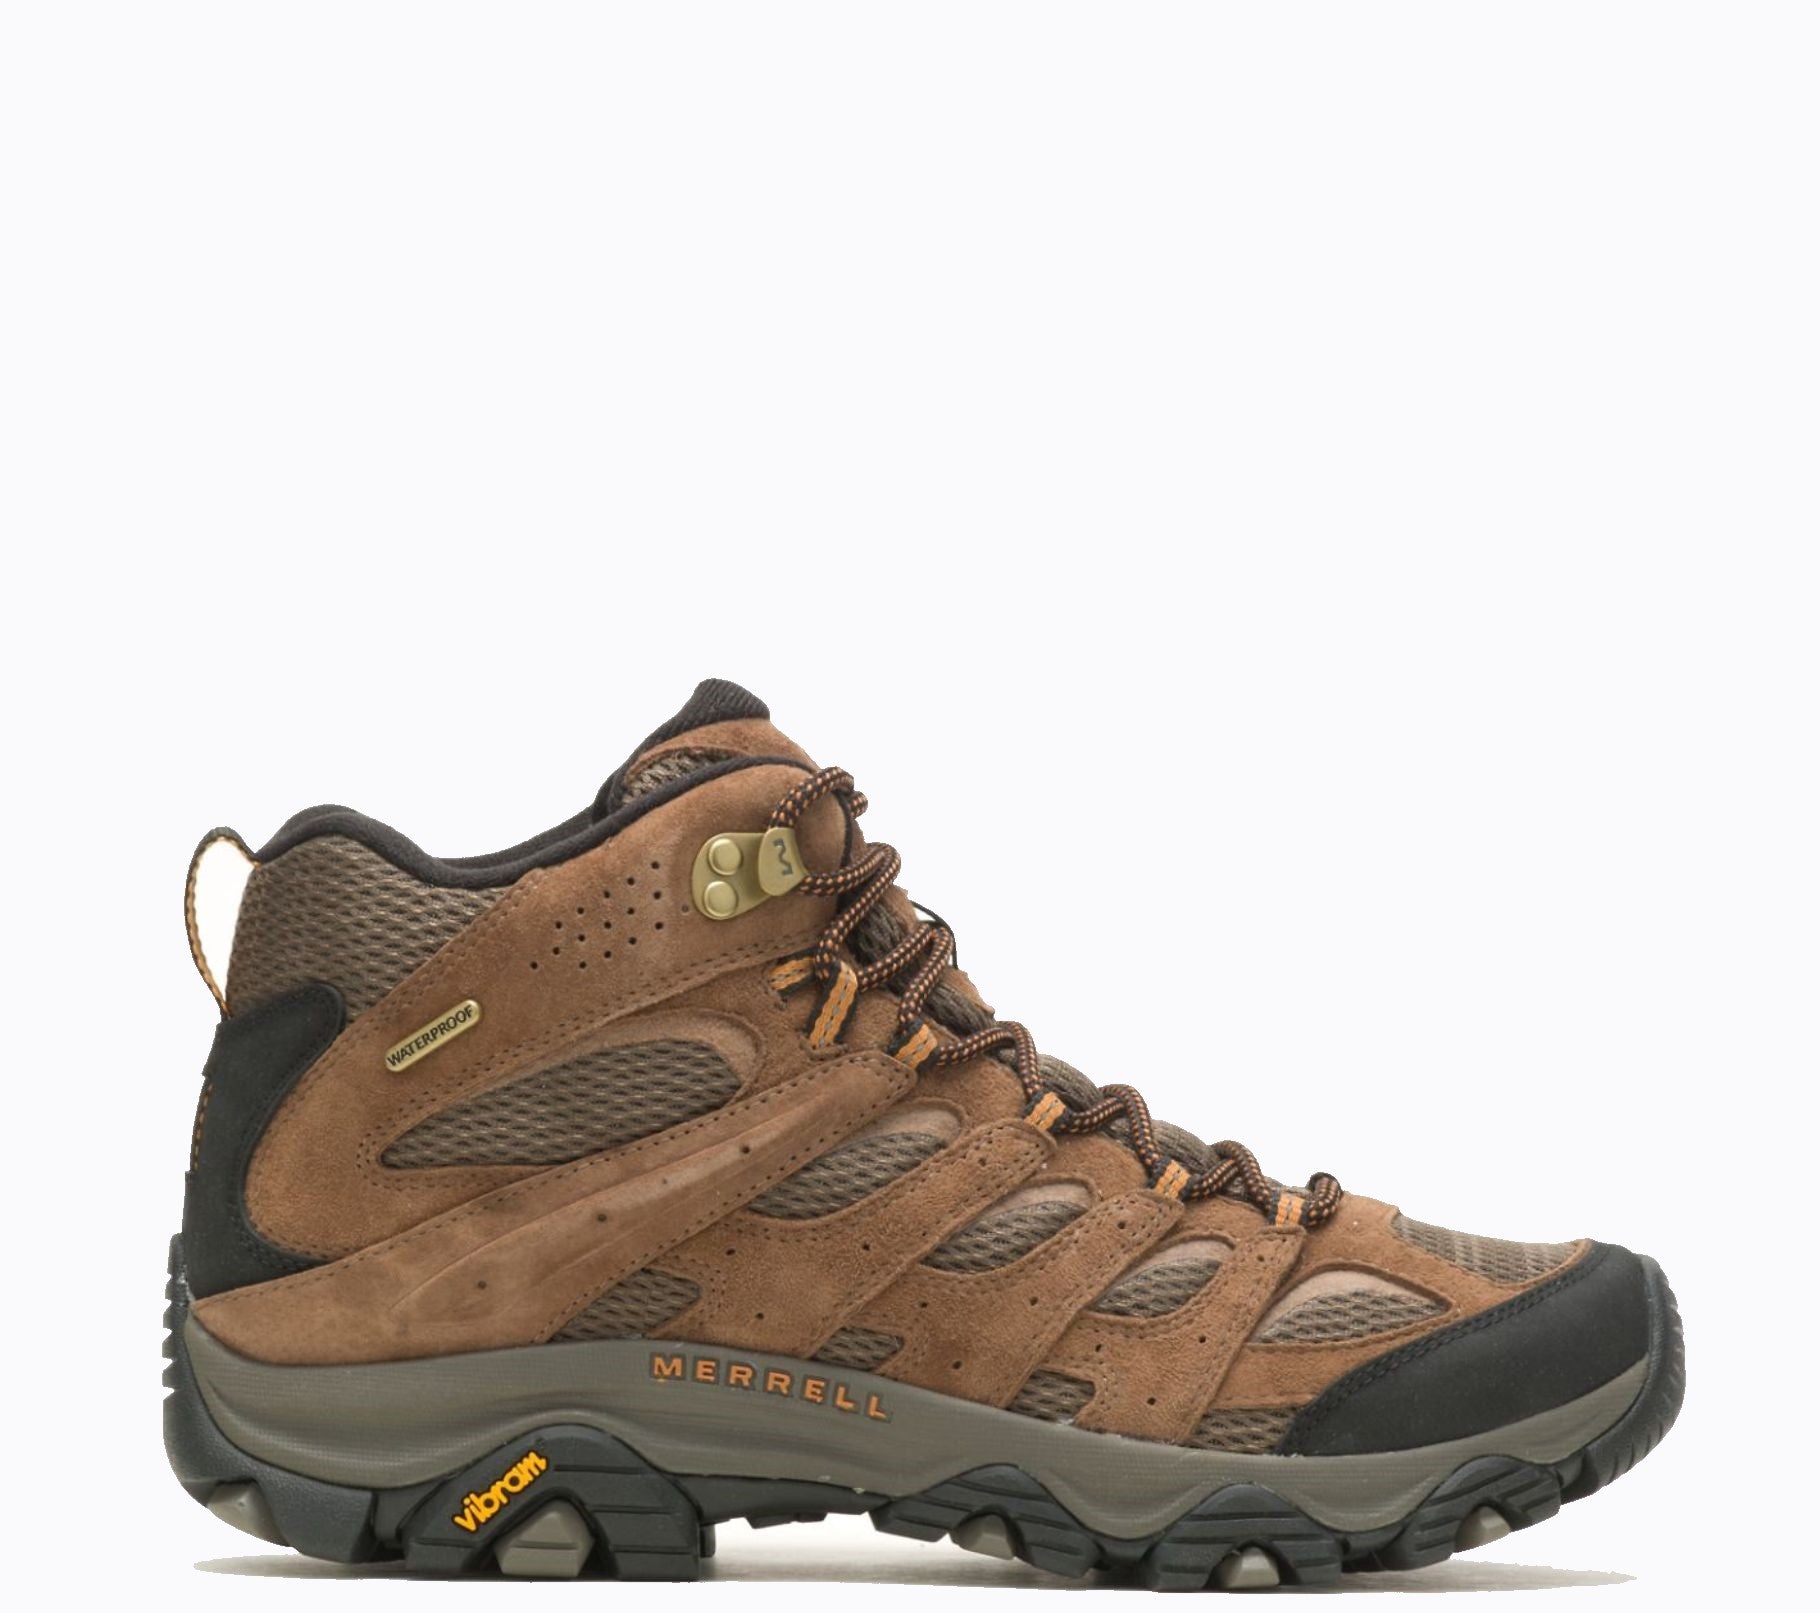 Merrell Men's Moab 3 Mid Boot - Work World - Workwear, Work Boots, Safety Gear